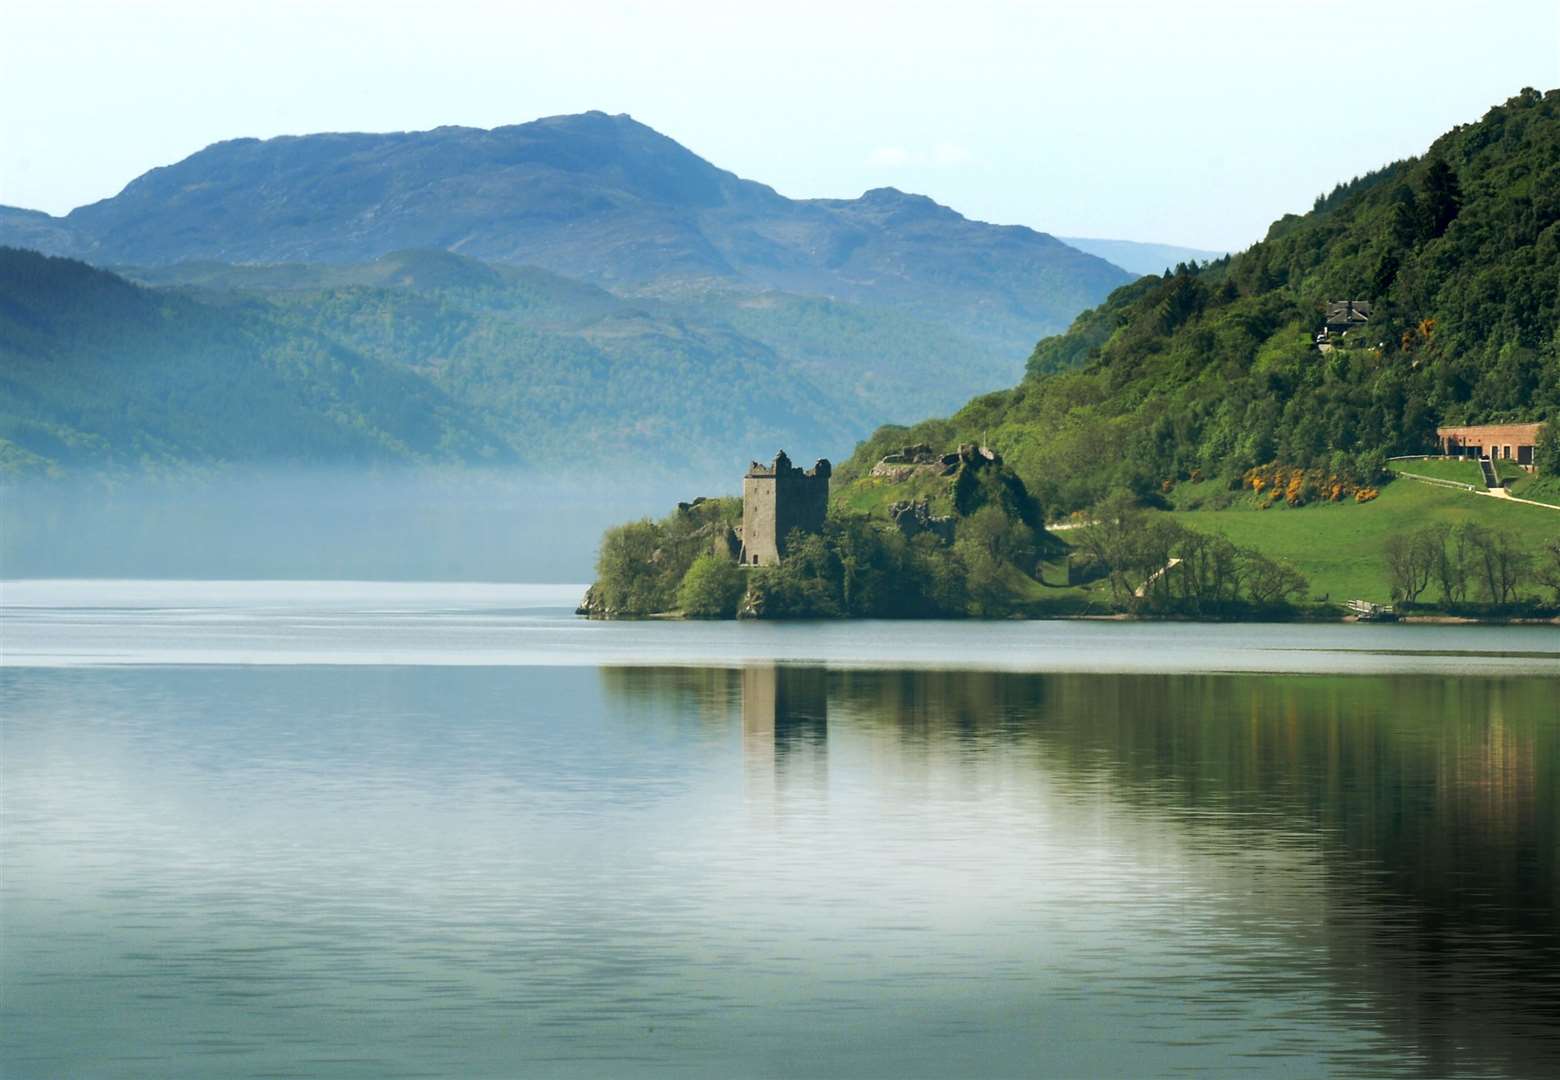 The Loch Ness Etape takes place this Sunday on roads around Loch Ness.